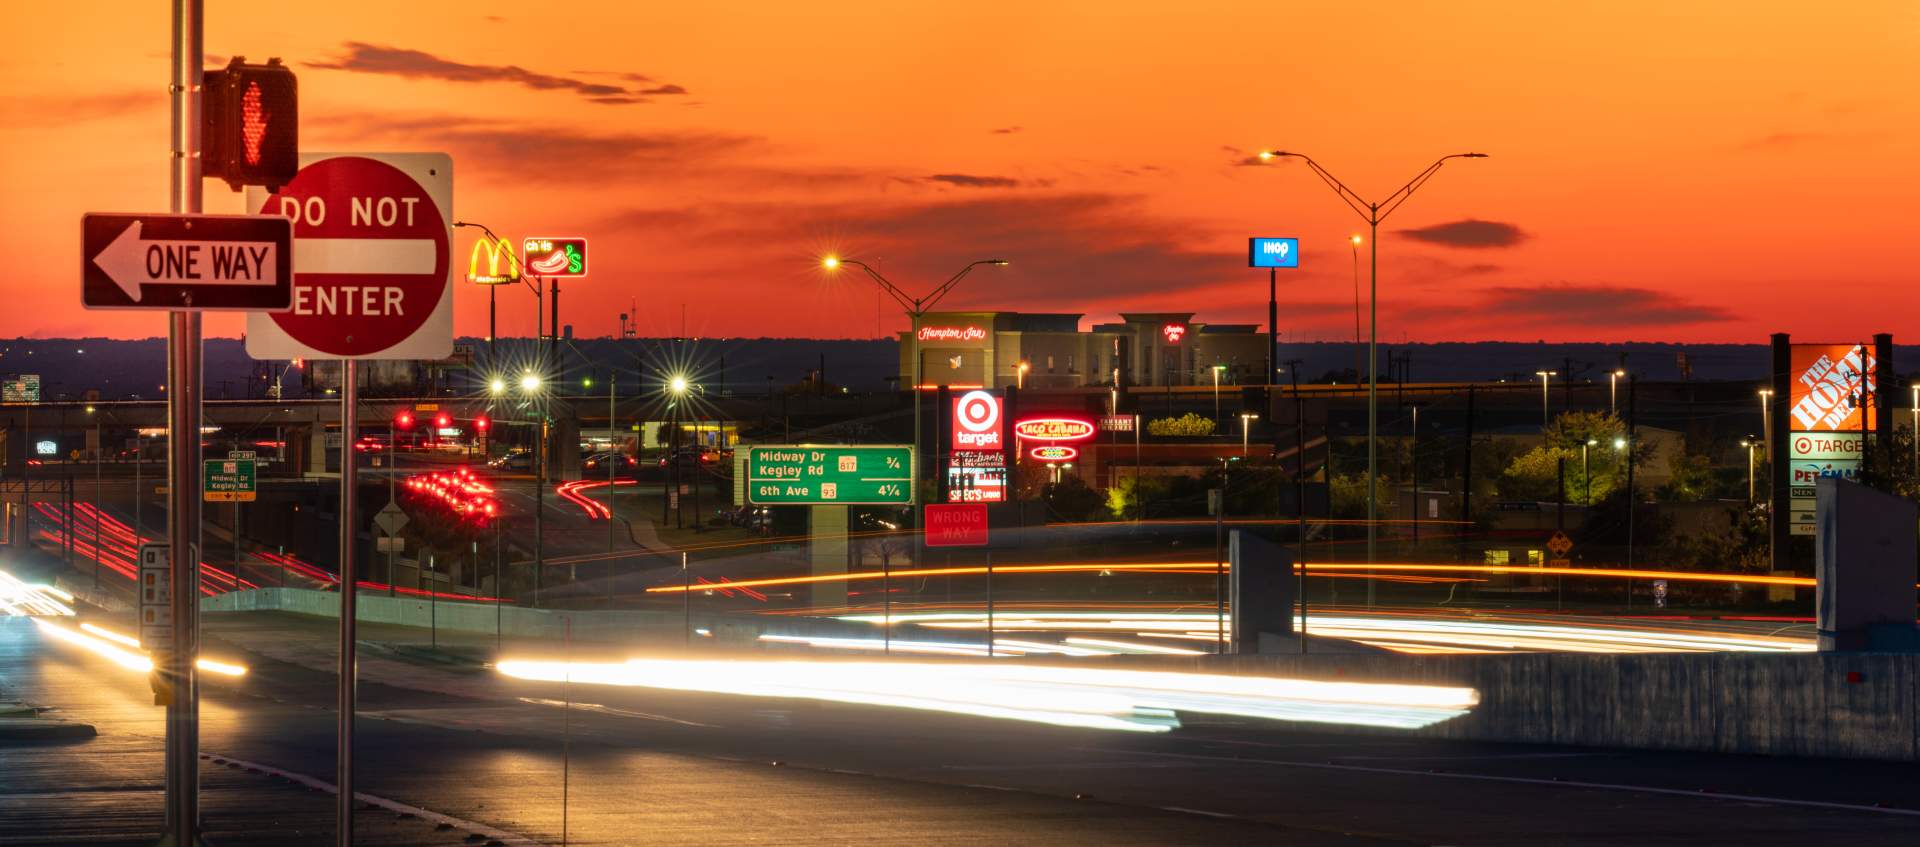 Night scene of the I-35 highway and the city of Temple TX